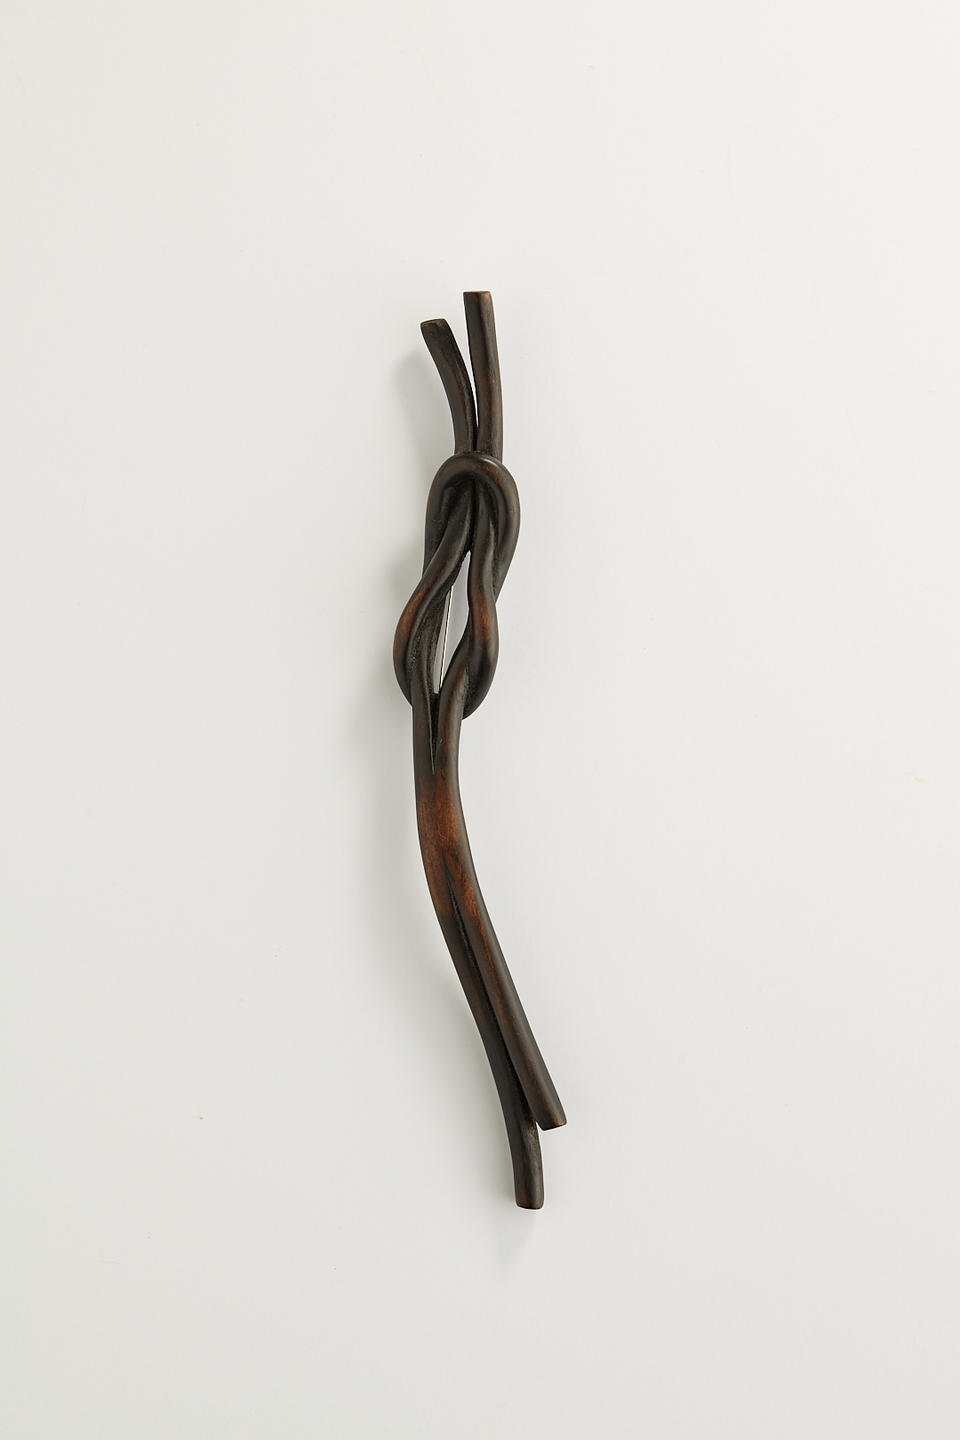 A dark knot brooch carved from wood